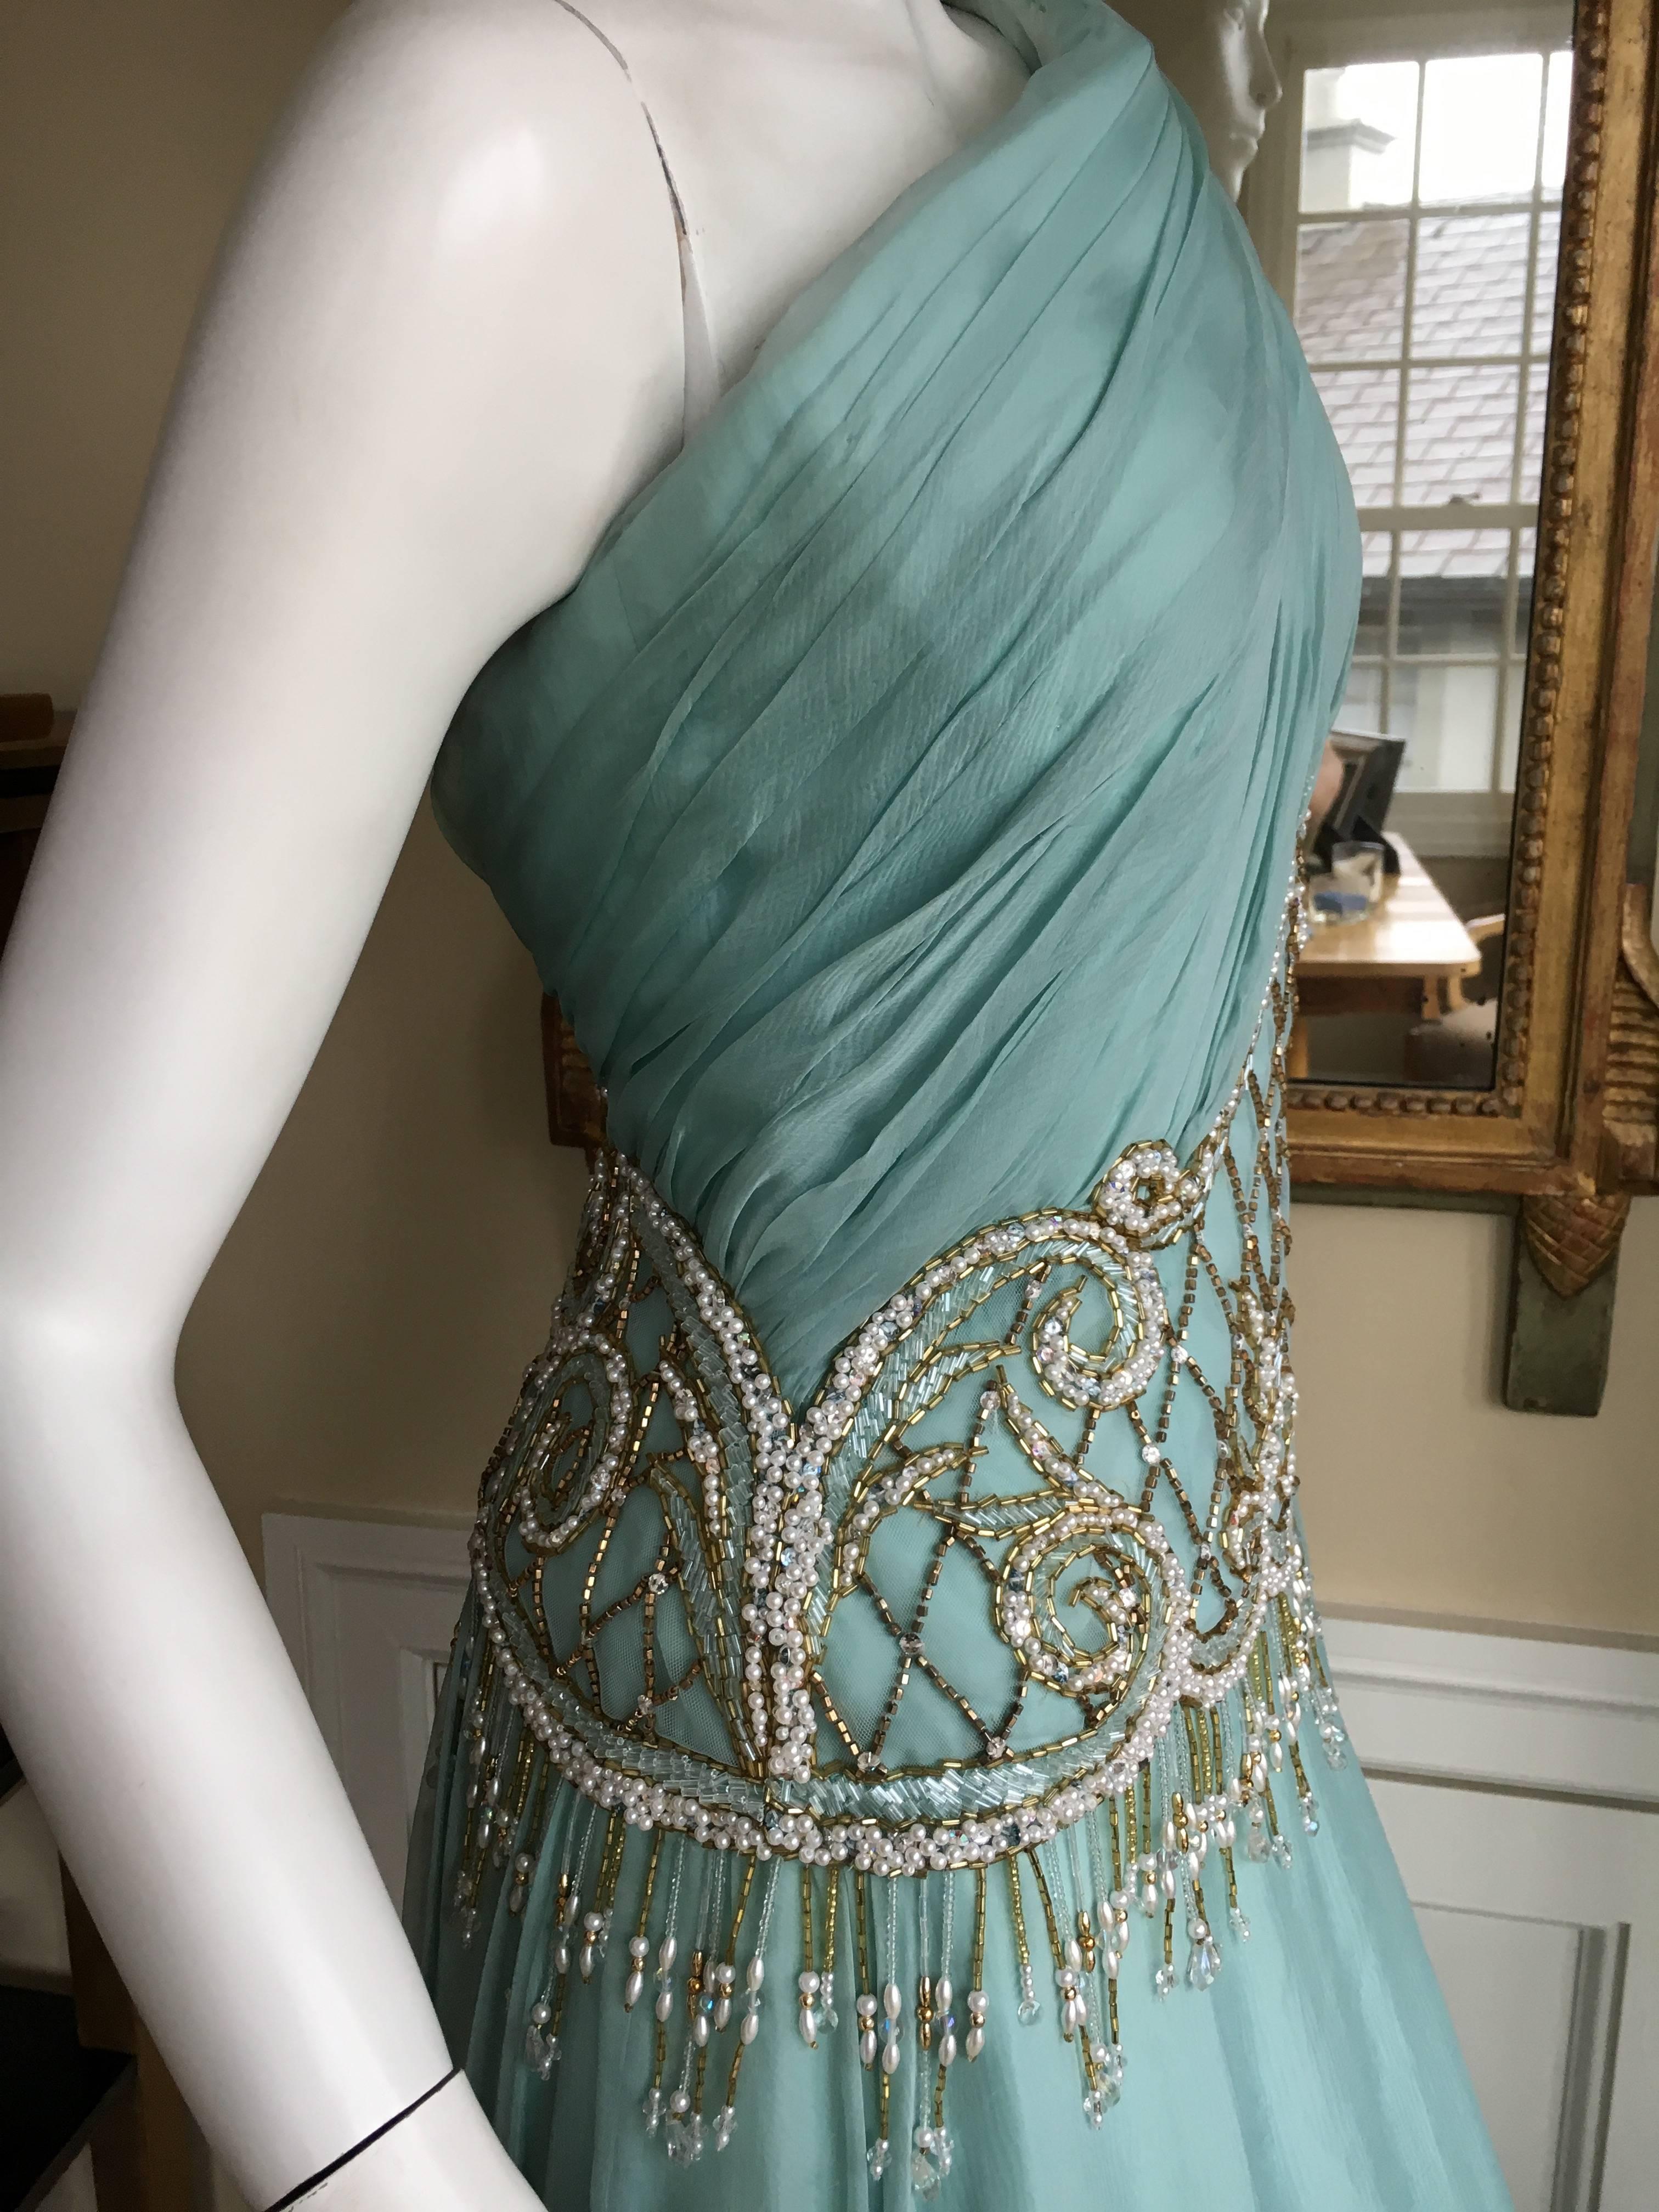 Bob Mackie One Shoulder Turquoise Goddess Gown with Fringe Pearl Embellishment.
Bust 36"
Waist 28"
HIps 45"
Length 55"